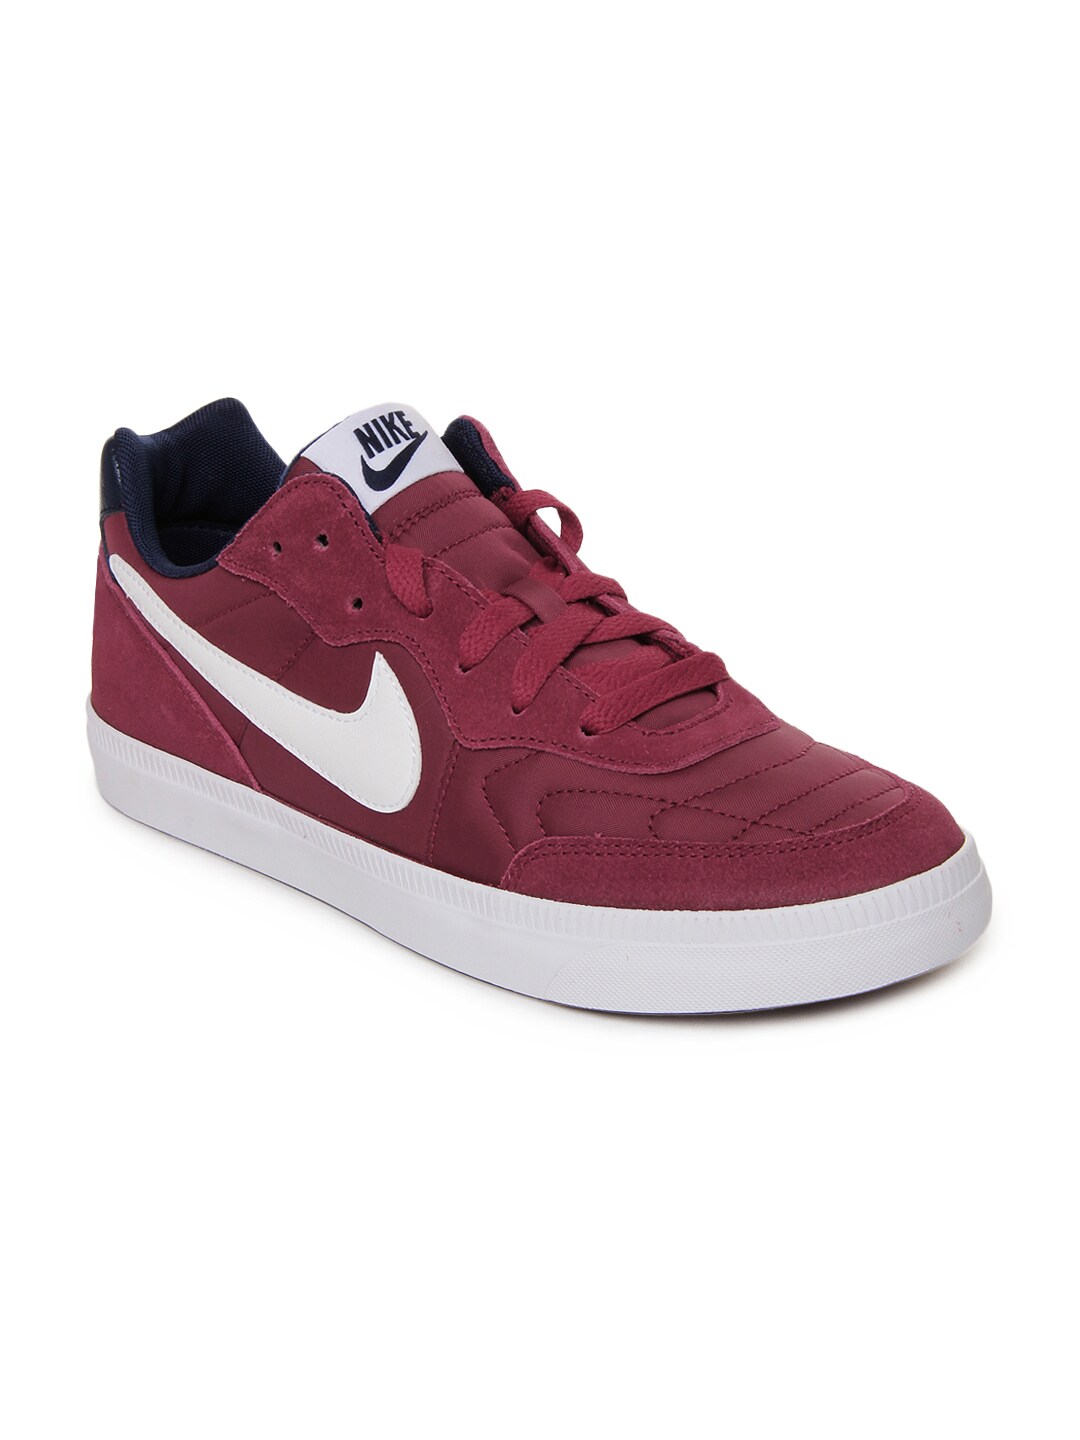 Buy Nike Maroon Tiempo Trainer NSW Casual Shoes - 632 - Footwear for